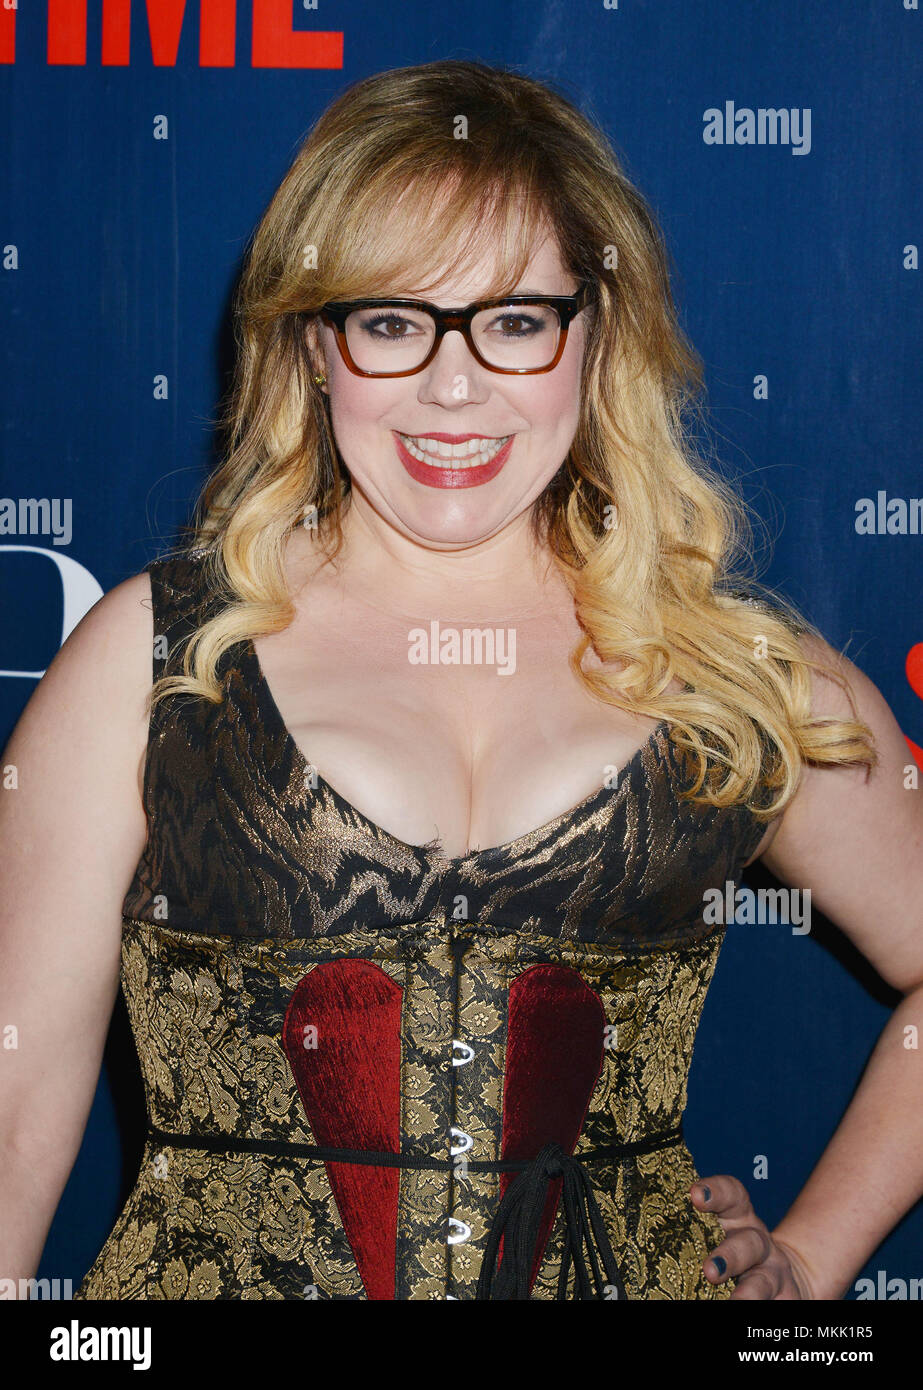 Kirsten Vangsness 151 at the 2015 CBS tca at the Pacific Design Center in Los Angeles. August 10, 2015.Kirsten Vangsness 151  Event in Hollywood Life - California,  Red Carpet Event, Vertical, USA, Film Industry, Celebrities,  Photography, Bestof, Arts Culture and Entertainment, Topix Celebrities fashion / one person, Vertical, Best of, Hollywood Life, Event in Hollywood Life - California,  Red Carpet and backstage, USA, Film Industry, Celebrities,  movie celebrities, TV celebrities, Music celebrities, Photography, Bestof, Arts Culture and Entertainment,  Topix, headshot, vertical, from the ye Stock Photo